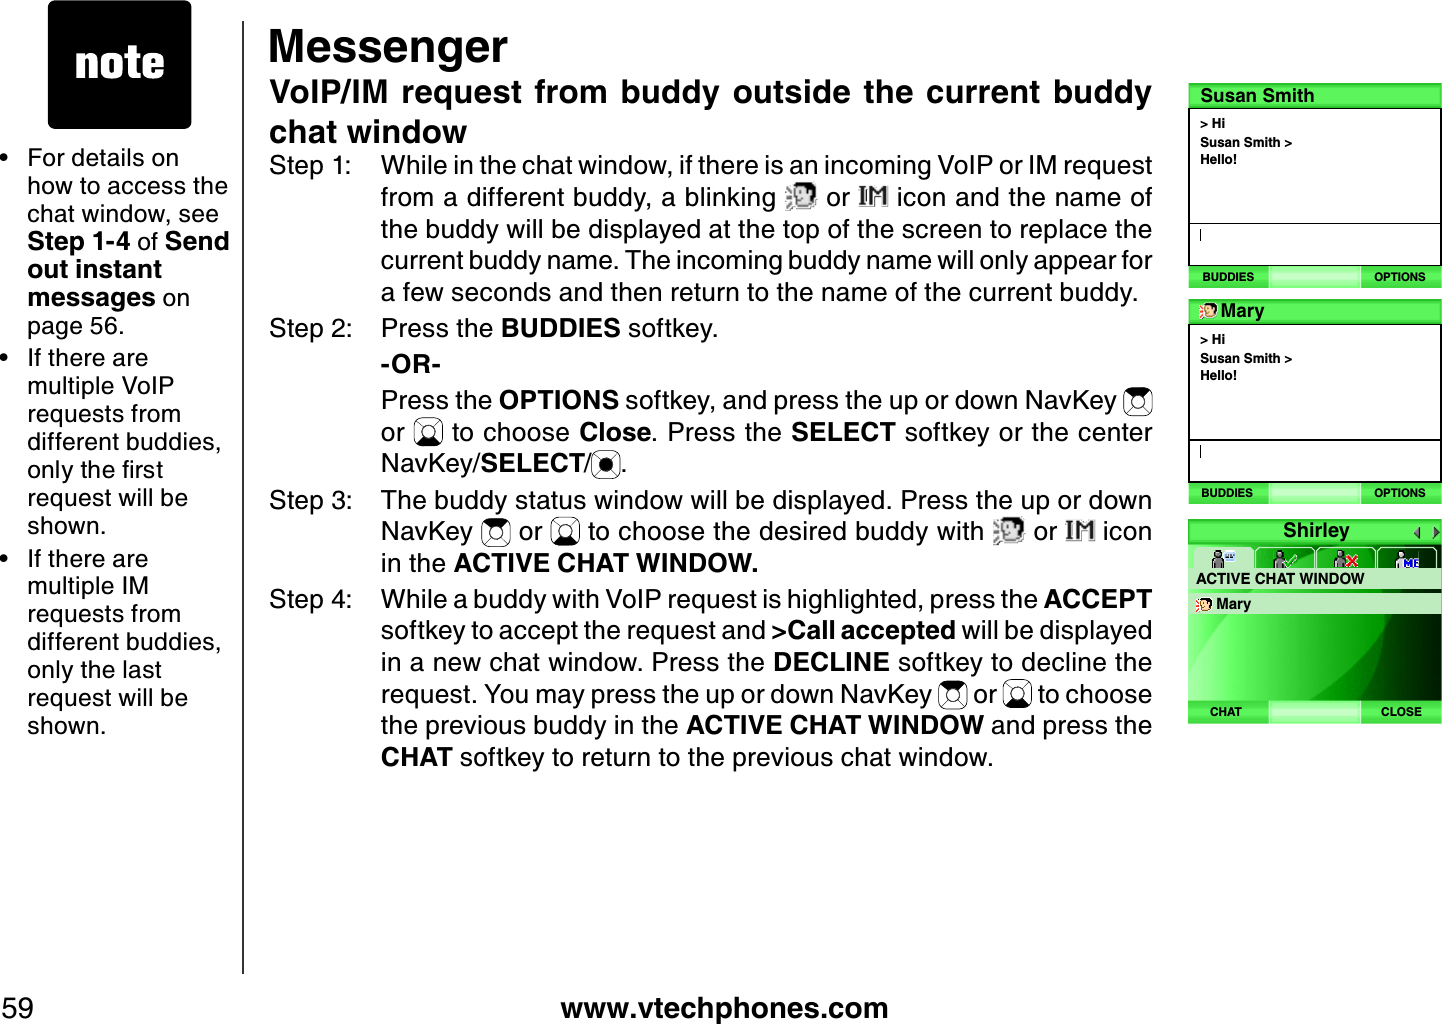 www.vtechphones.com59MessengerVoIP/IM  request from buddy outside the current buddy chat windowStep 1: While in the chat window, if there is an incoming VoIP or IM request from a different buddy, a blinking   or   icon and the name of the buddy will be displayed at the top of the screen to replace the current buddy name. The incoming buddy name will only appear for a few seconds and then return to the name of the current buddy. Step 2: Press the BUDDIES softkey.       -OR-    Press the OPTIONS softkey, and press the up or down NavKey or   to choose Close. Press the SELECT softkey or the center NavKey/SELECT/.Step 3: The buddy status window will be displayed. Press the up or down NavKey   or   to choose the desired buddy with   or   icon in the ACTIVE CHAT WINDOW. Step 4: While a buddy with VoIP request is highlighted, press the ACCEPTsoftkey to accept the request and &gt;Call accepted will be displayed in a new chat window. Press the DECLINE softkey to decline the request. You may press the up or down NavKey   or   to choose the previous buddy in the ACTIVE CHAT WINDOW and press the CHAT softkey to return to the previous chat window.For details on how to access the chat window, see Step 1 -4 of Send out instant messages on page 56.If there are multiple VoIP requests from different buddies, QPN[VJGſTUVrequest will be shown.If there are multiple IM requests from different buddies, only the last request will be shown.•••&gt; HiSusan Smith &gt; Hello!Susan SmithBUDDIES OPTIONS&gt; HiSusan Smith &gt; Hello!MaryBUDDIES OPTIONSShirleyACTIVE CHAT WINDOWMaryCLOSECHAT